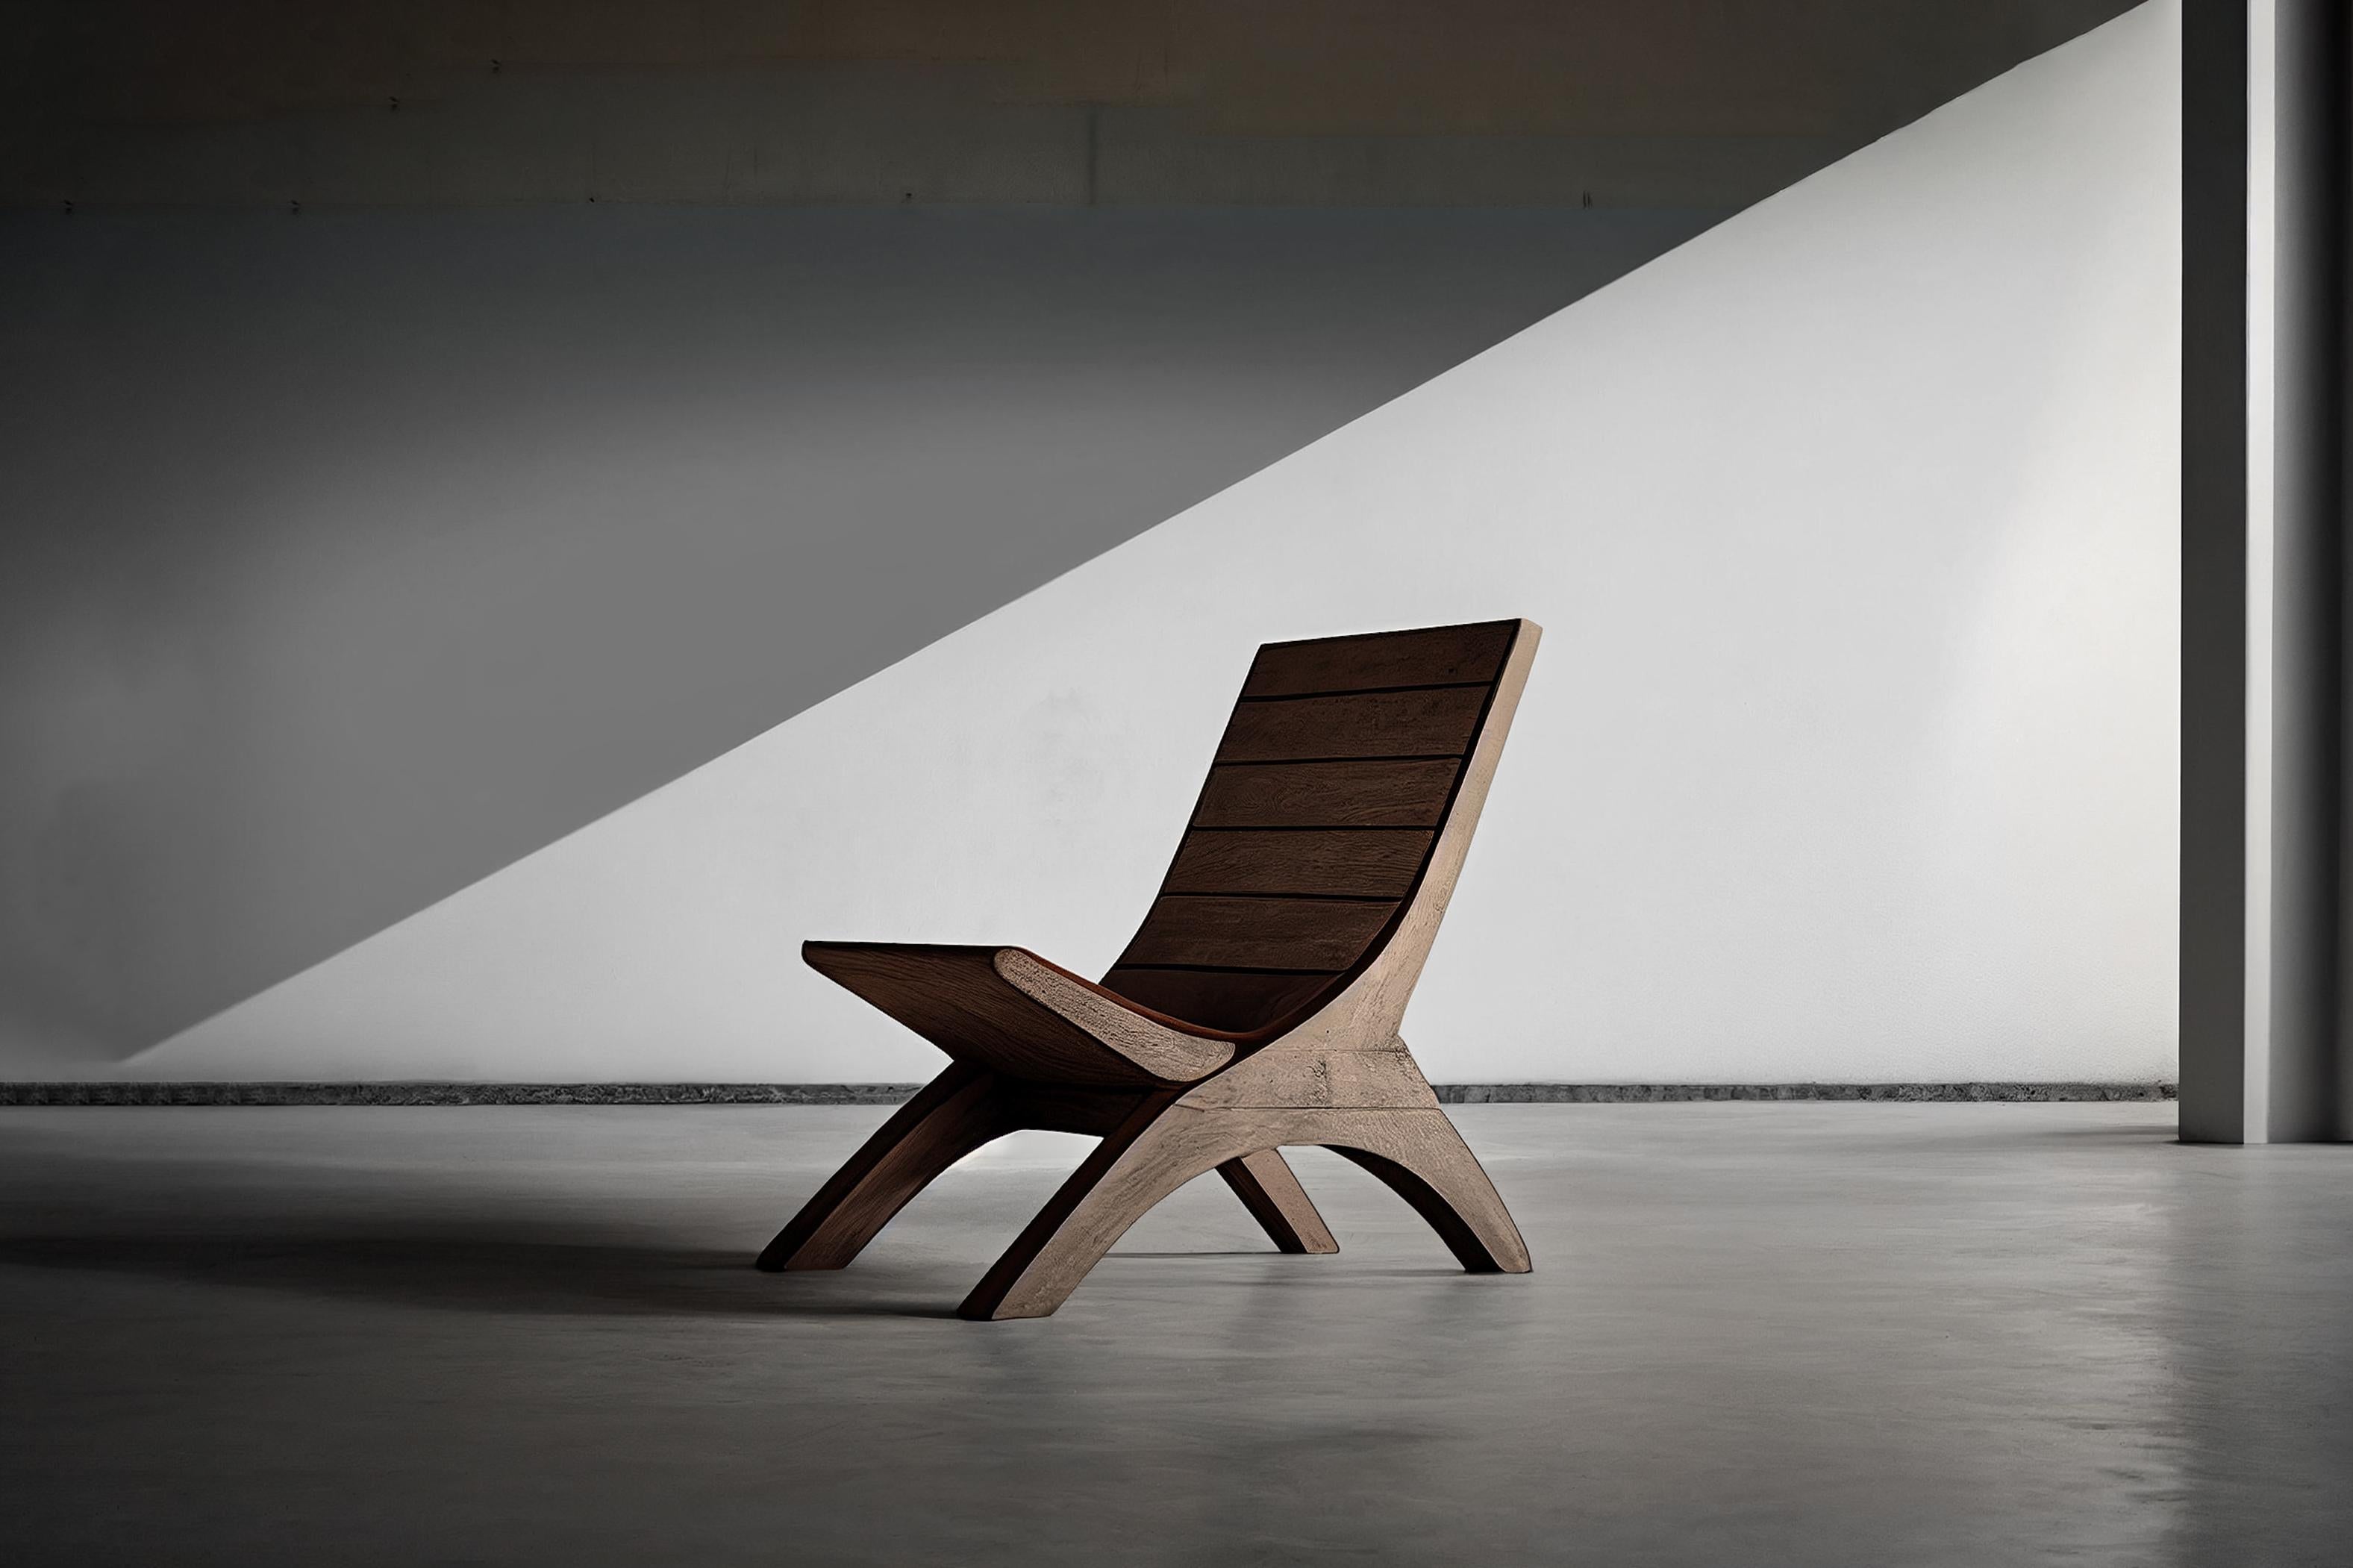 Butaque lounge chair made of solid wood inspired in Clara Porset Design 


The Butaque lounge chair is an exquisite creation by NONO that draws inspiration from the celebrated design of Clara Porset. Crafted from solid wood, the Butaque lounge